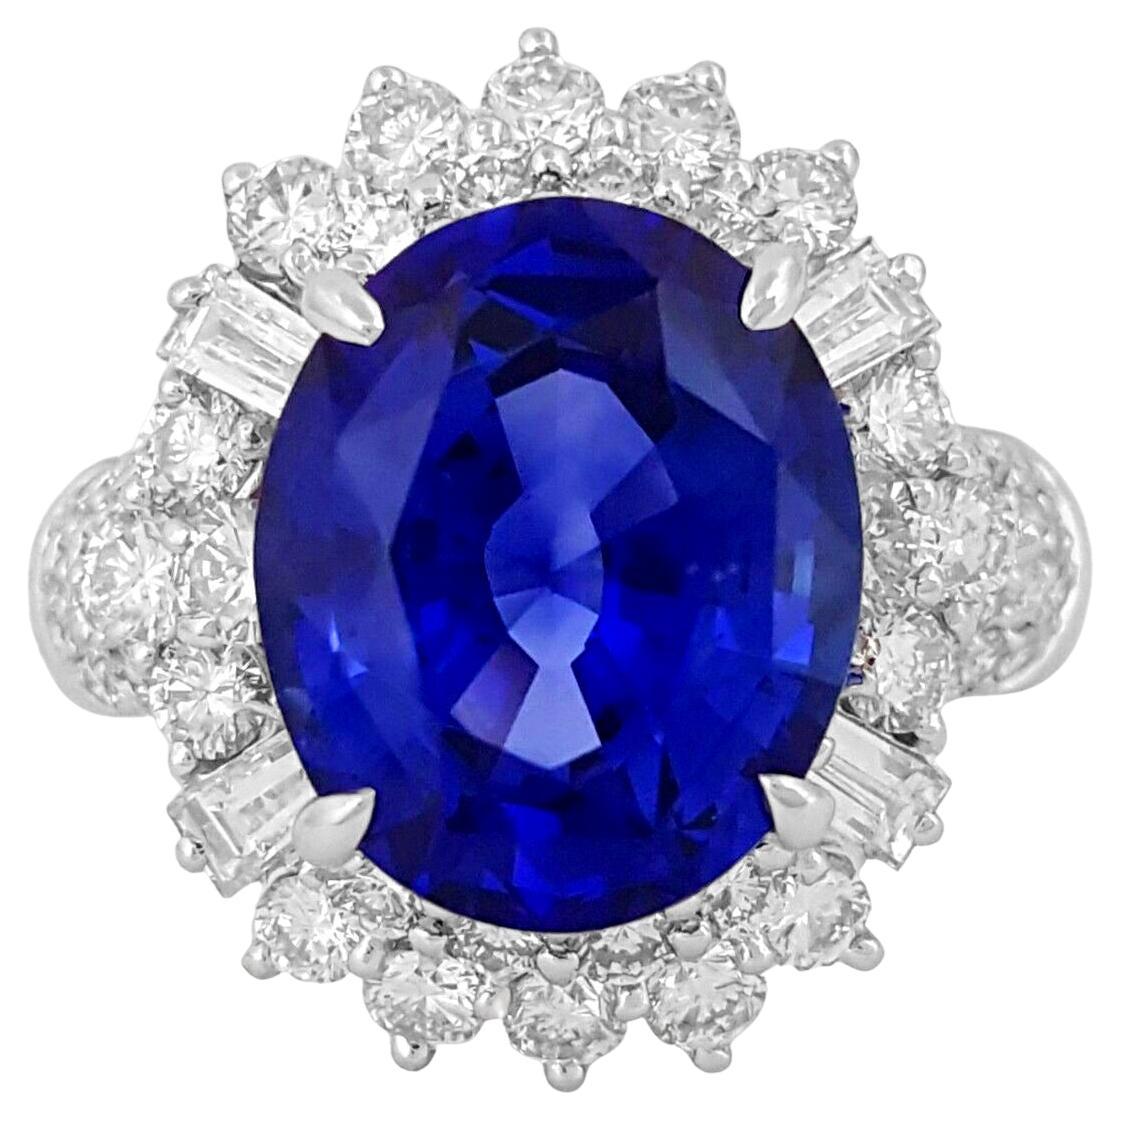 How many carats is a 7mm Sapphire?